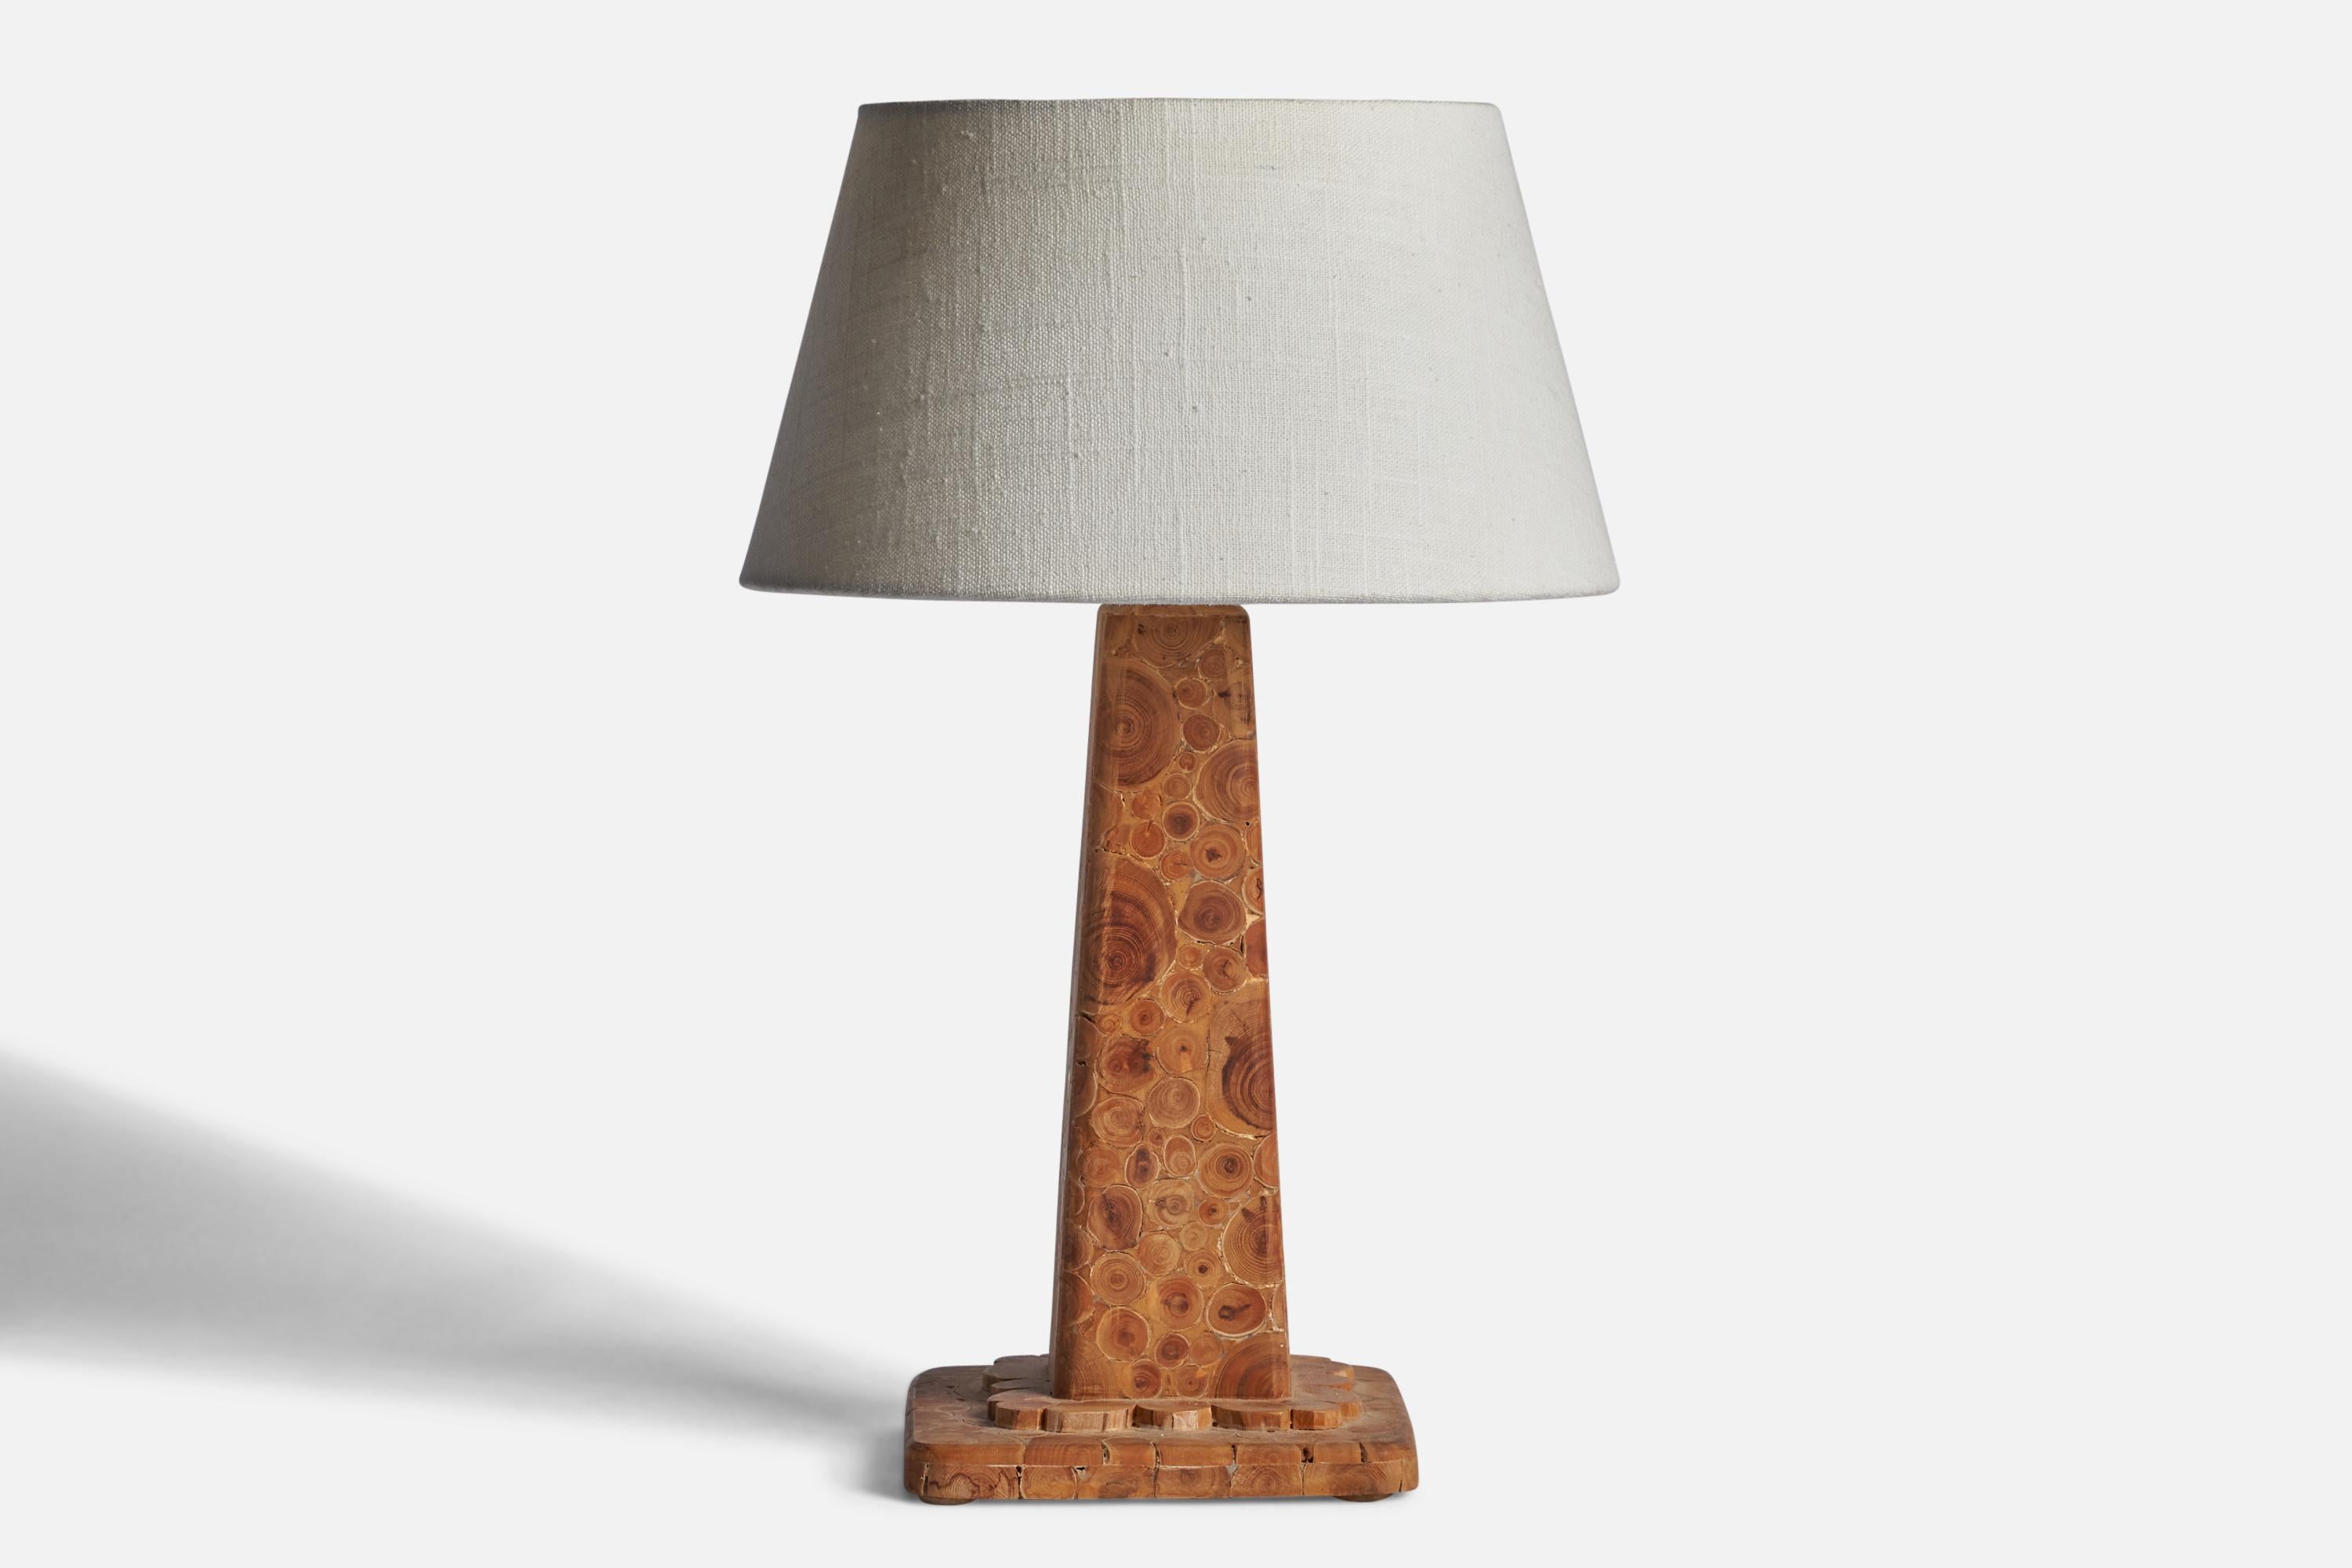 A wood branch veneer table lamp designed and produced in Sweden, dated 1974.

Dimensions of Lamp (inches): 12.5” H x 5.75” Diameter
Dimensions of Shade (inches): 7” Top Diameter x 10” Bottom Diameter x 5.5” H 
Dimensions of Lamp with Shade (inches):